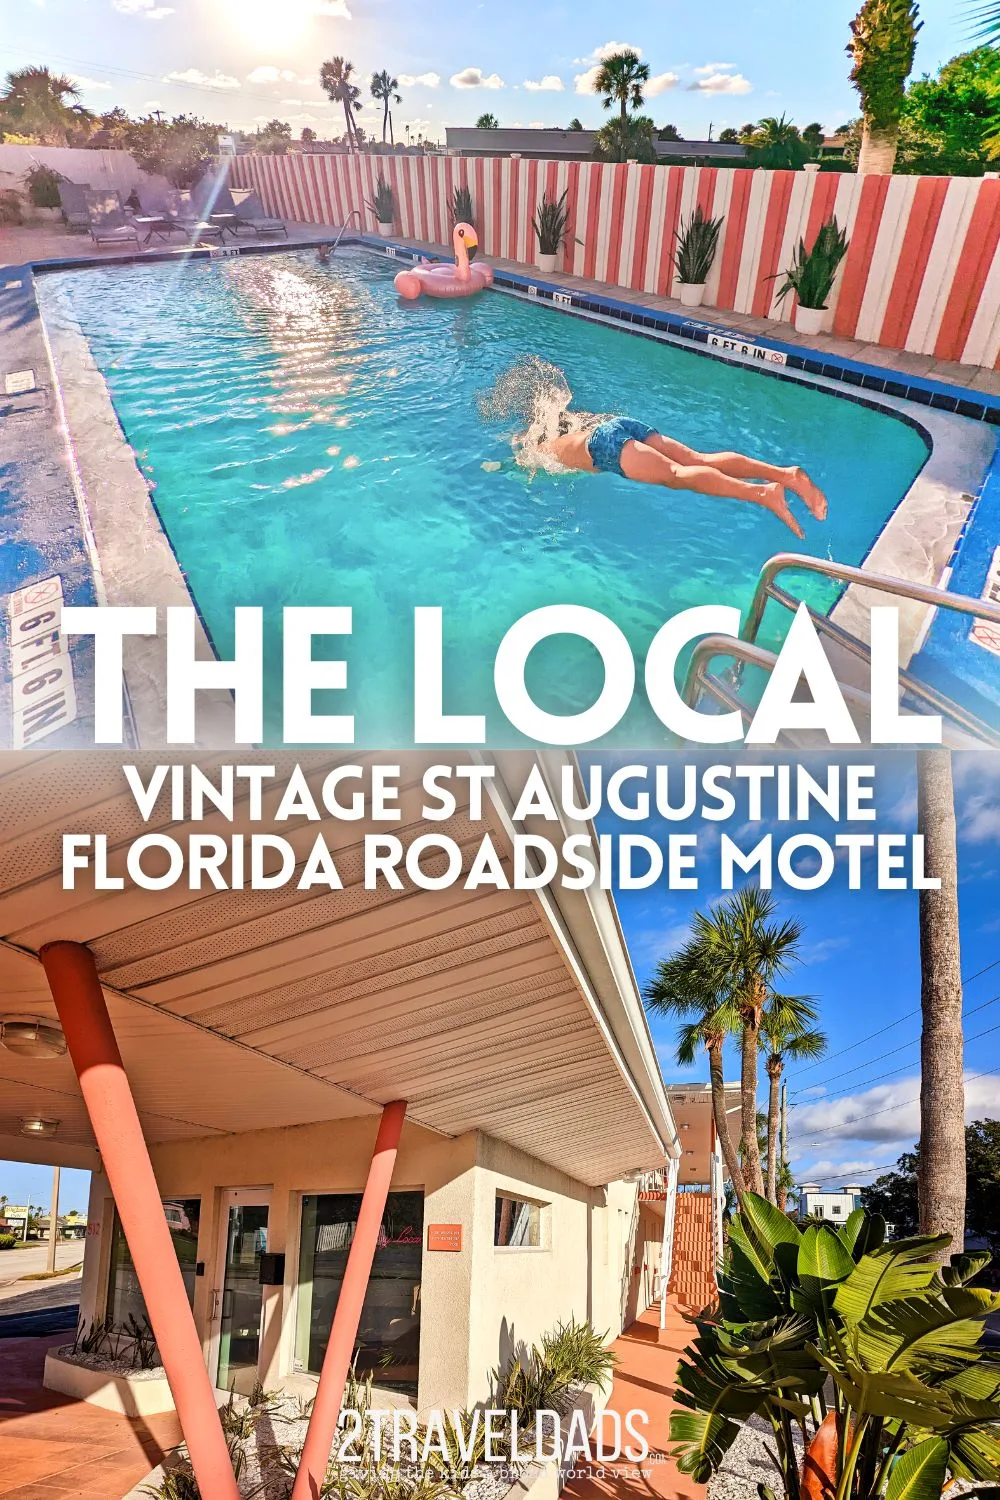 Review of the Local Inn St Augustine, Florida. Located on Anastasia Island, this vintage Florida roadside motel is a fun, comfortable and budget friendly hotel in St Augustine close to the beach and downtown.